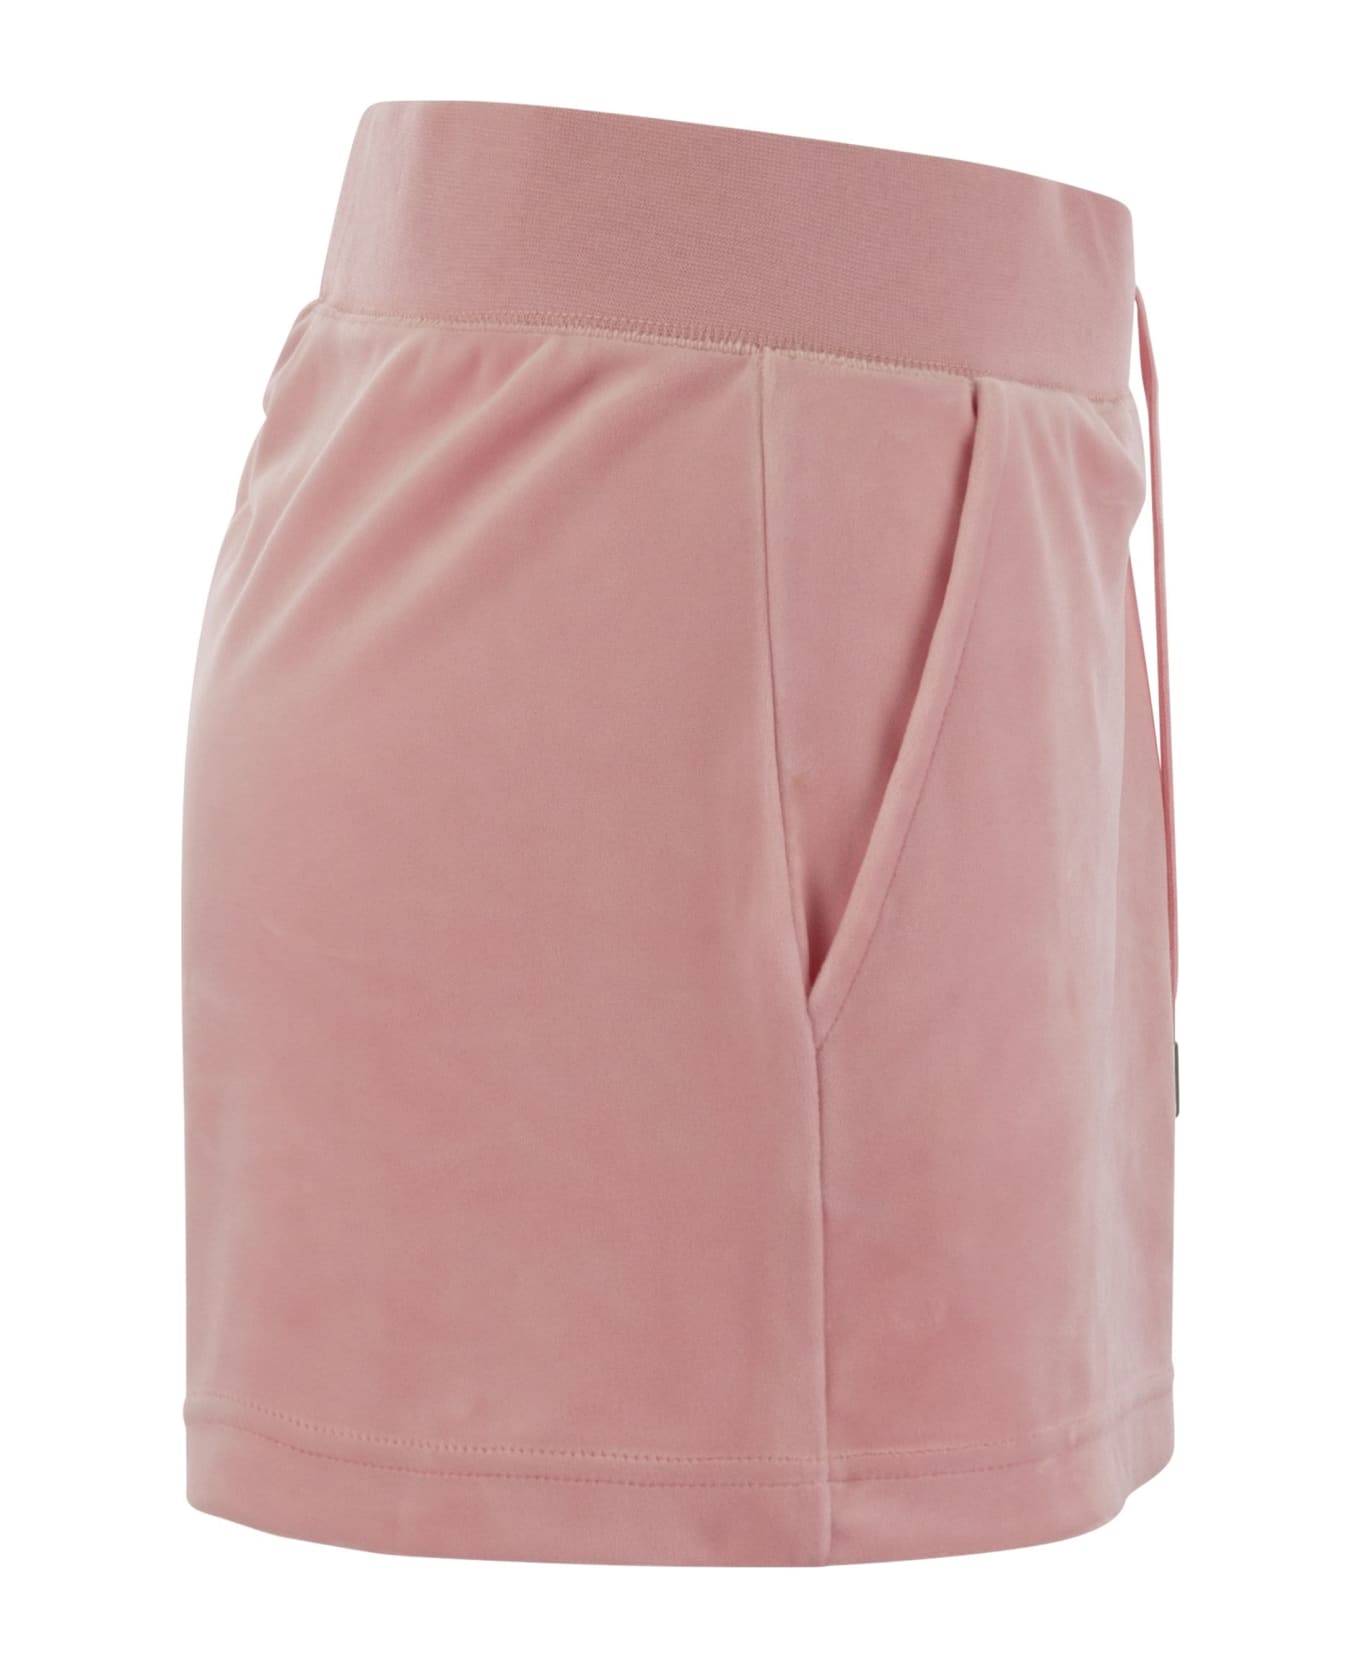 Juicy Couture Velour Shorts - Pink